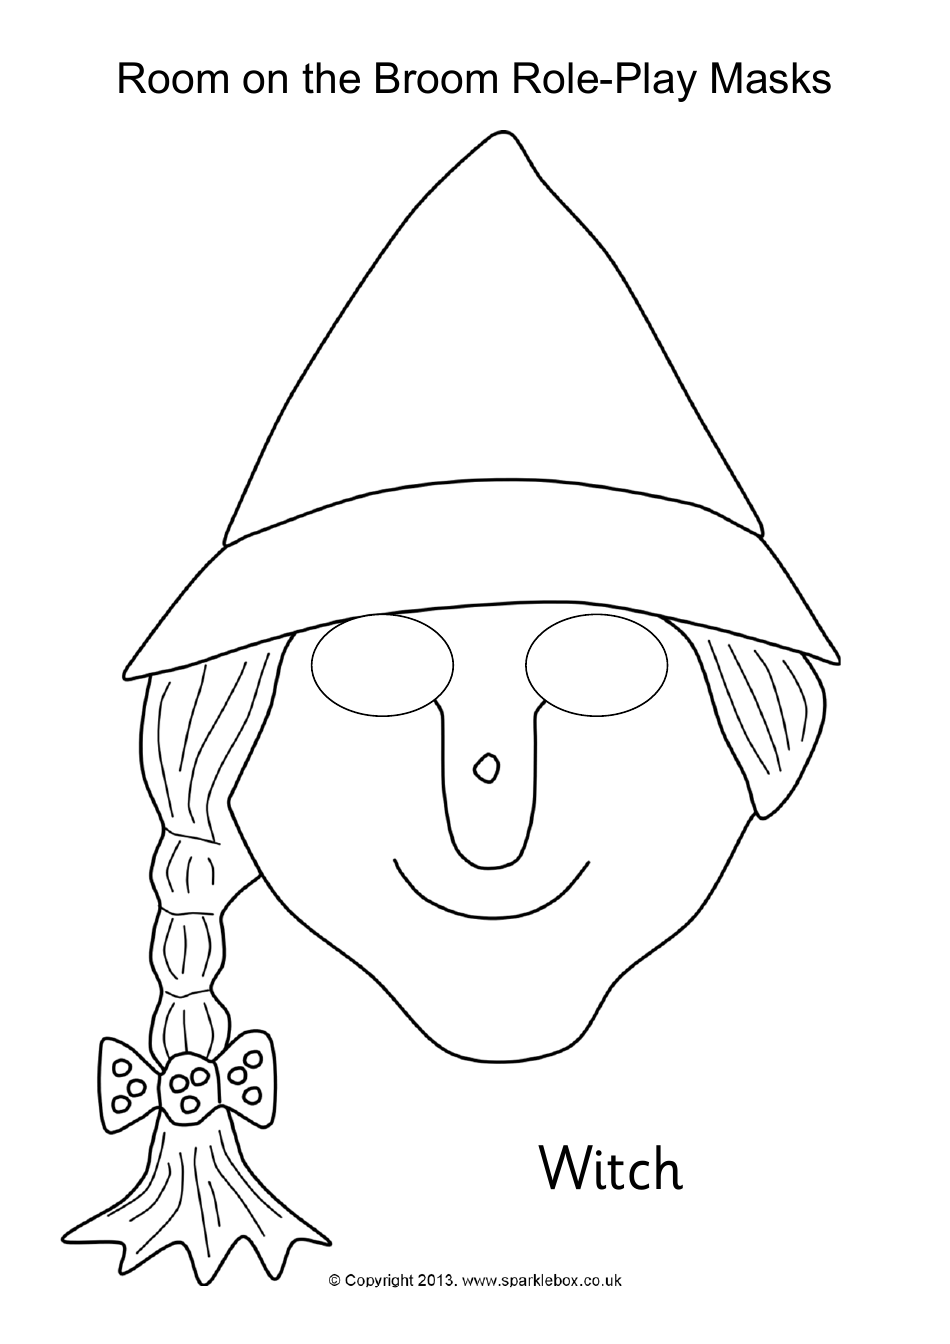 Room on the Broom Role-Play Mask Coloring Templates